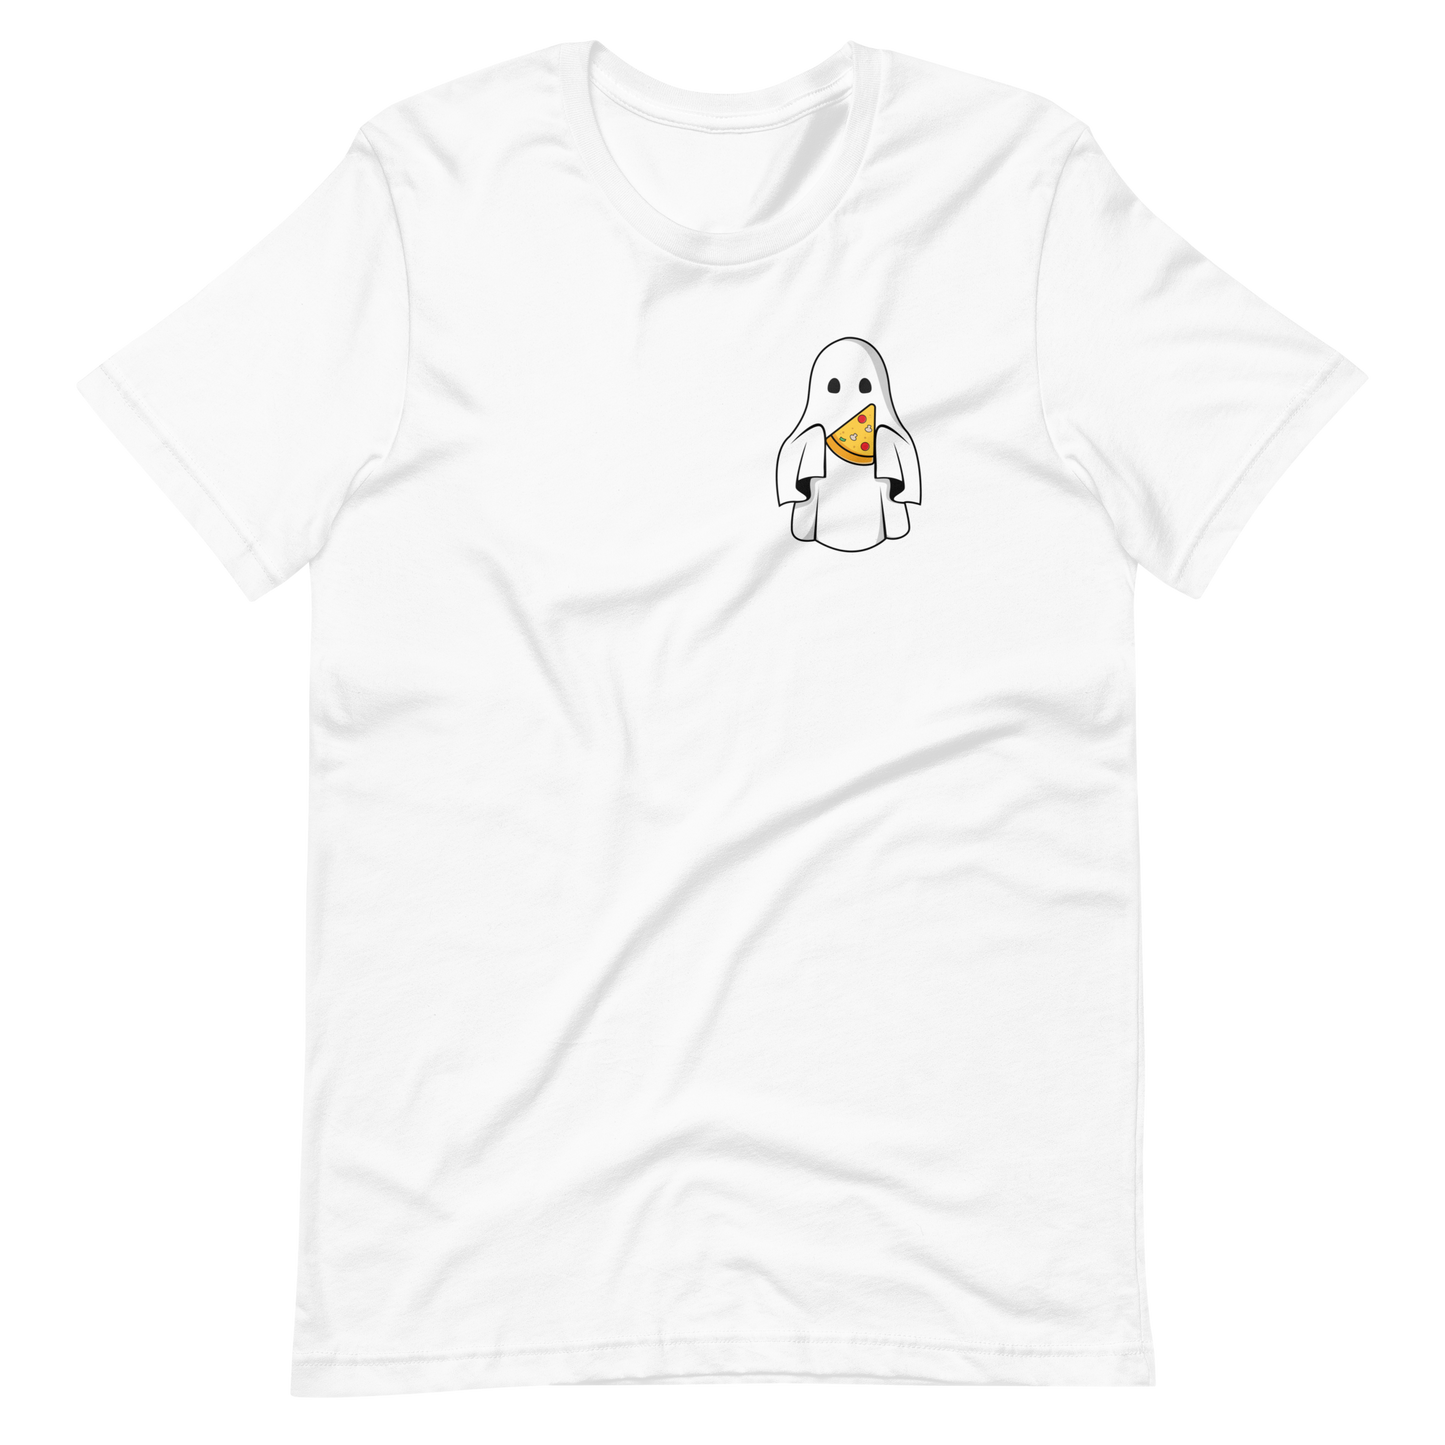 Ghost boo with pizza | Unisex t-shirt - F&B